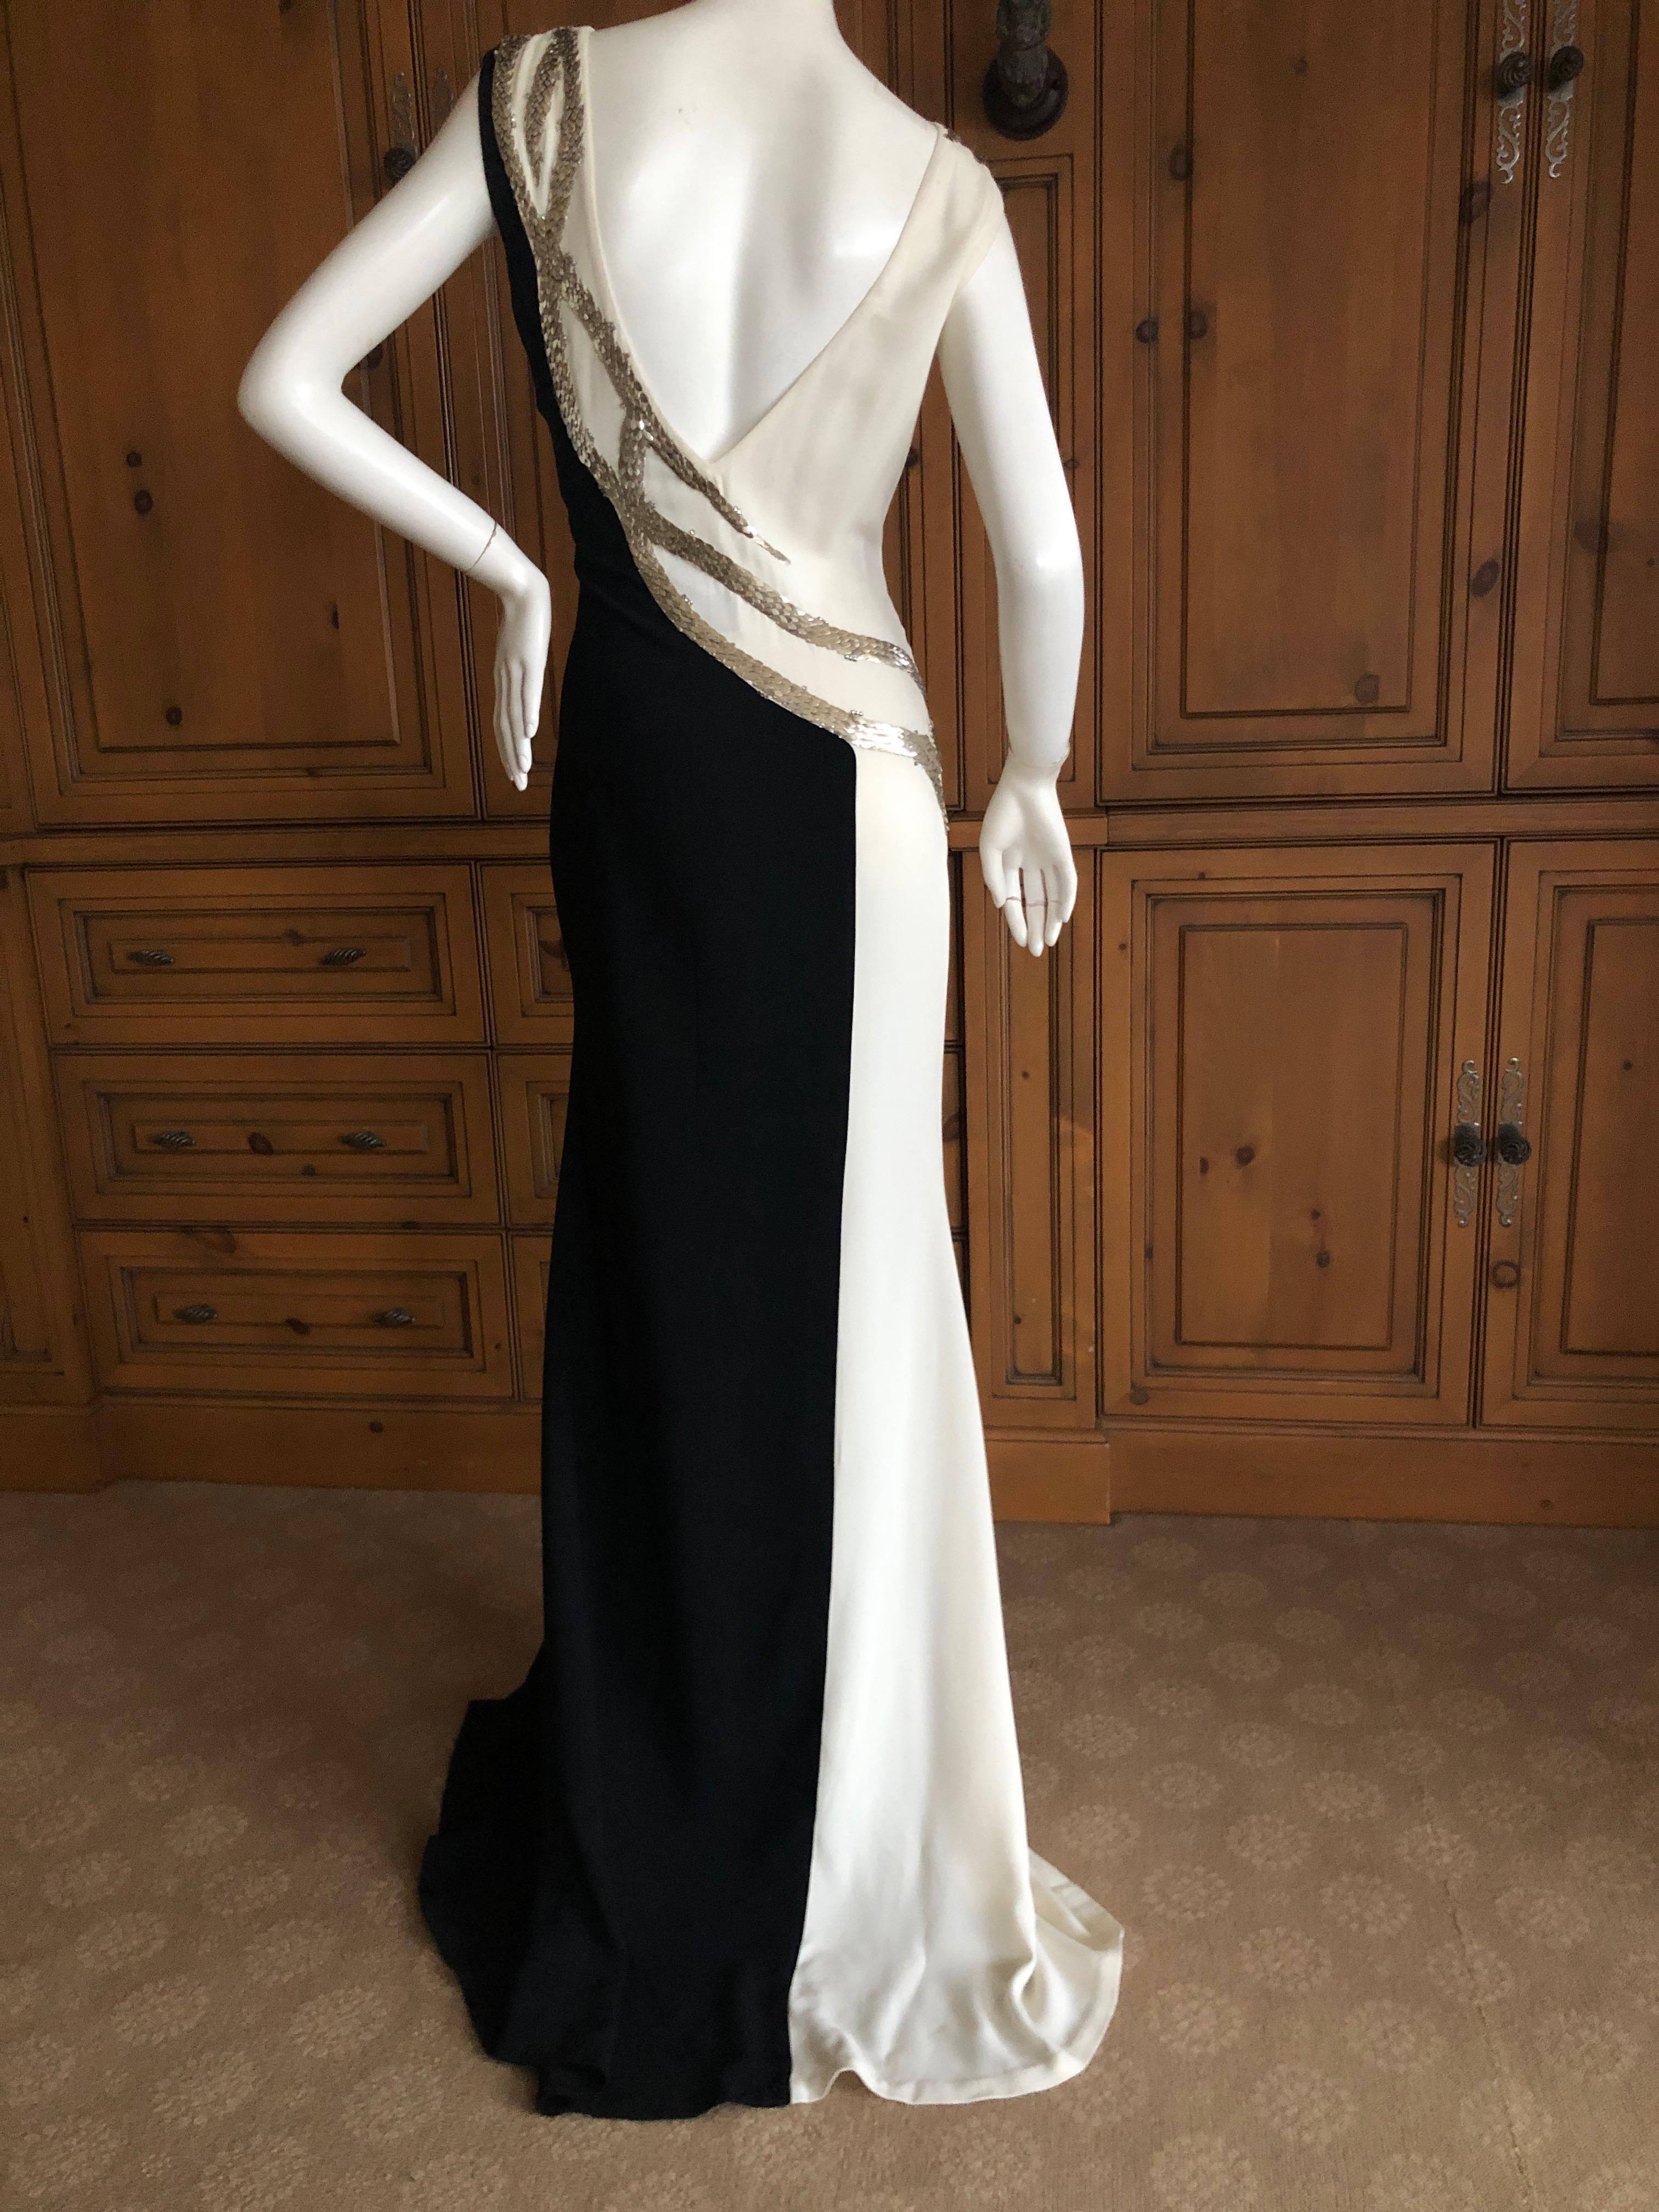 Oscar de la Renta Black and White Gown with Silver Snake Scale Sequin Details 8 For Sale 1